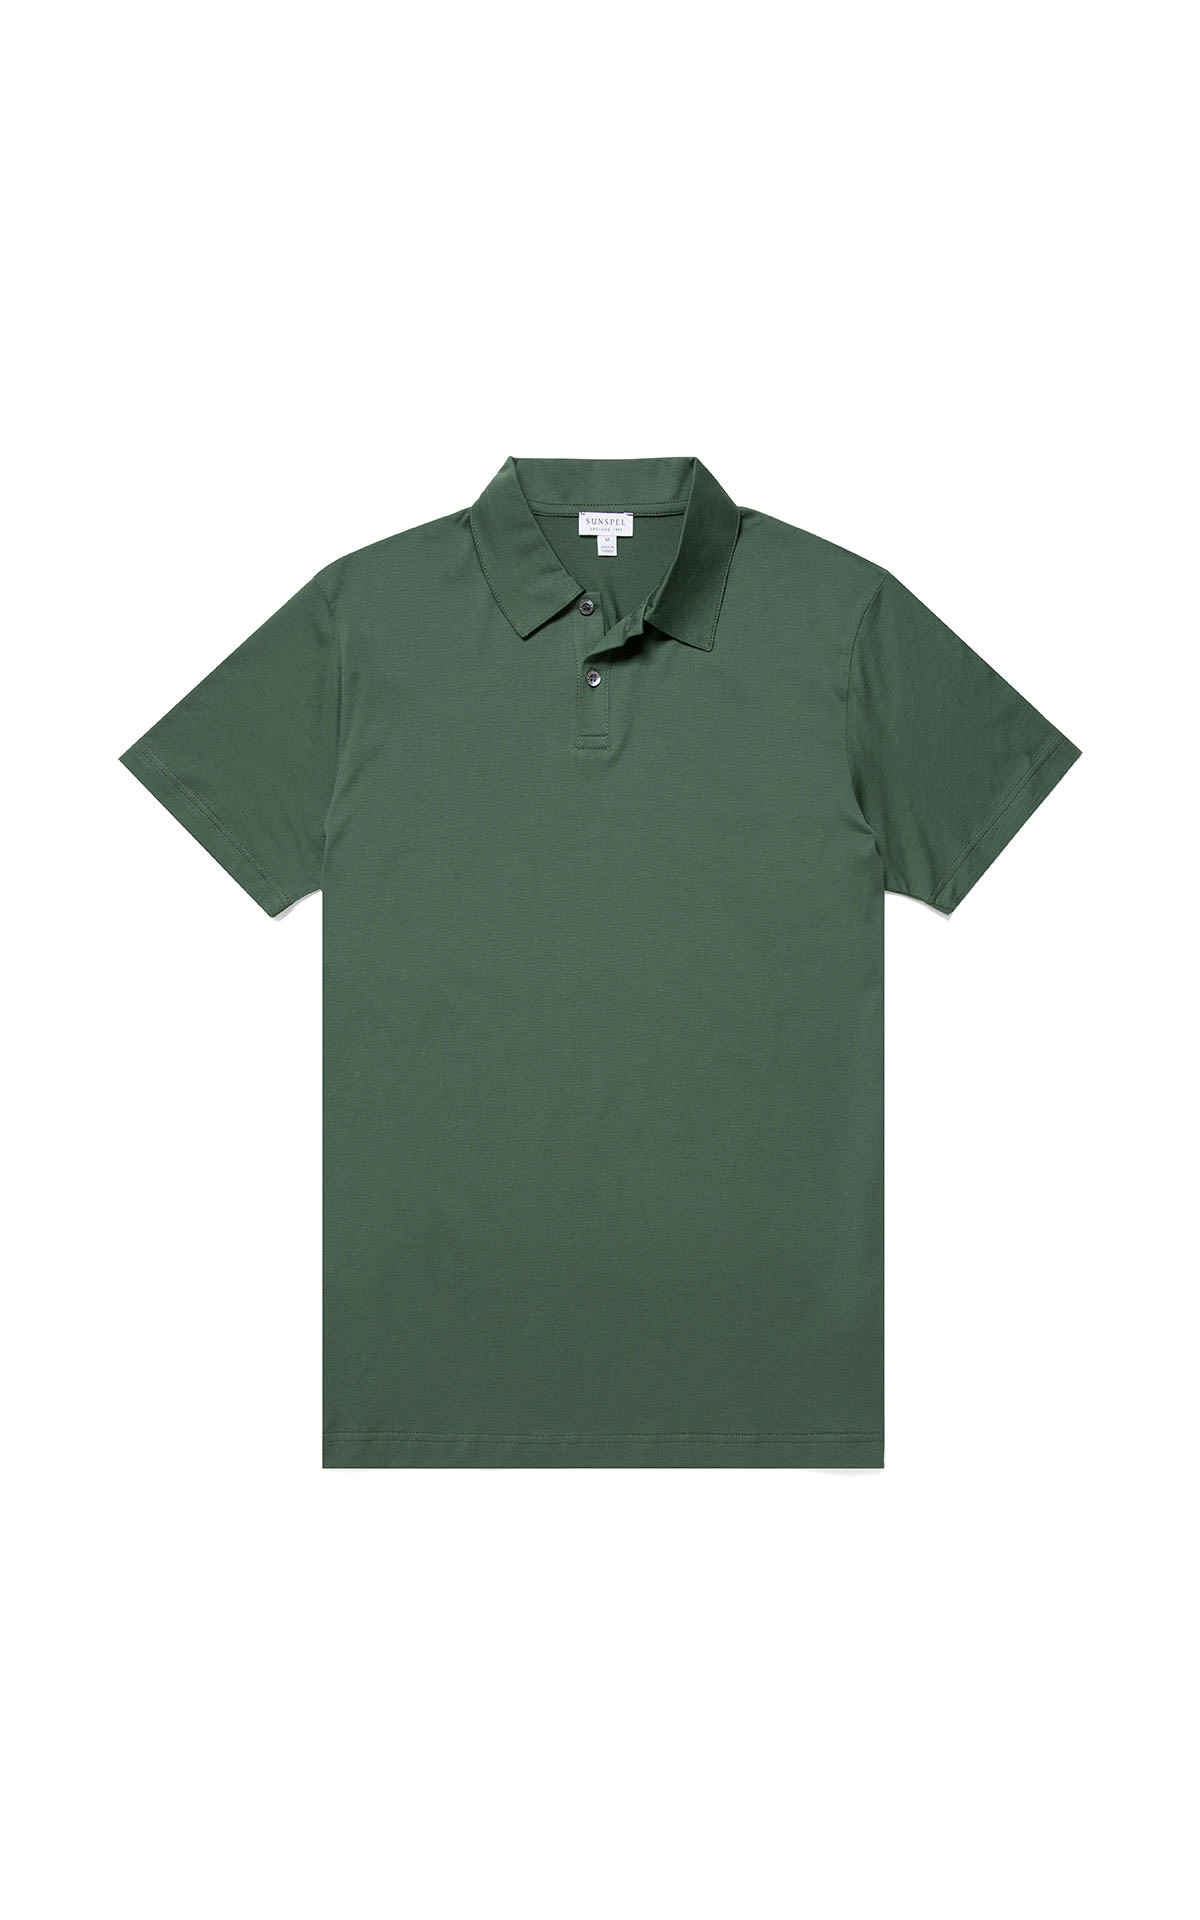 Sunspel Cotton jersey polo shirt from Bicester Village